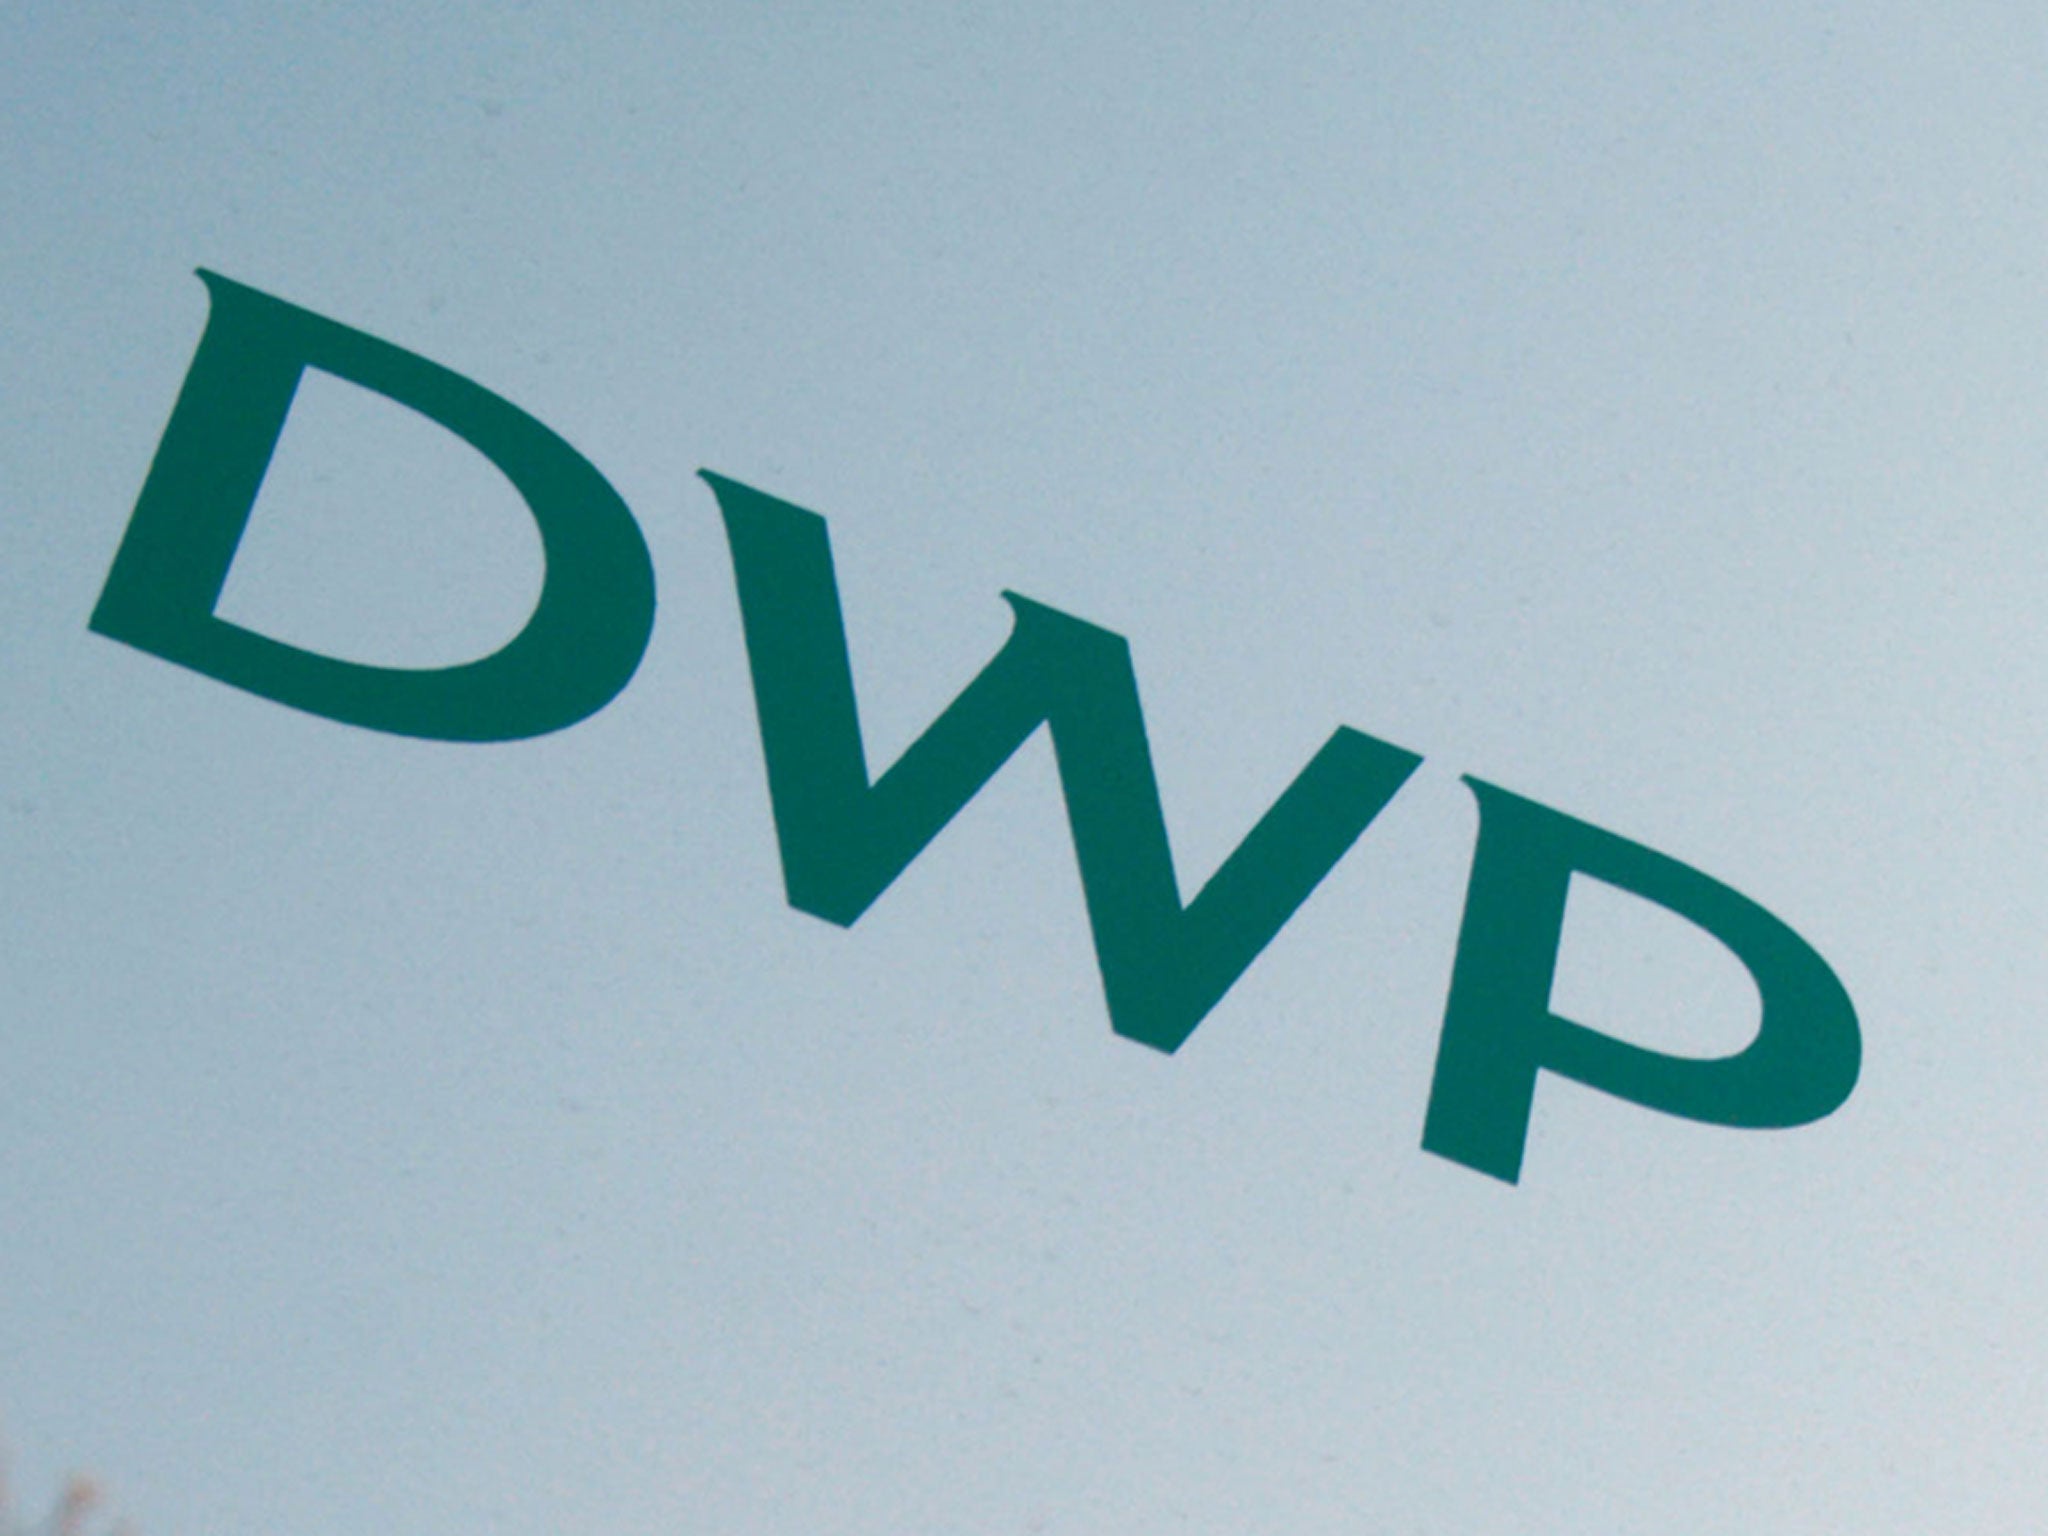 It was reported that a leaked internal memo from the Department of Work and Pensions (DWP) says the site had become too costly to run and has been 'undermined'